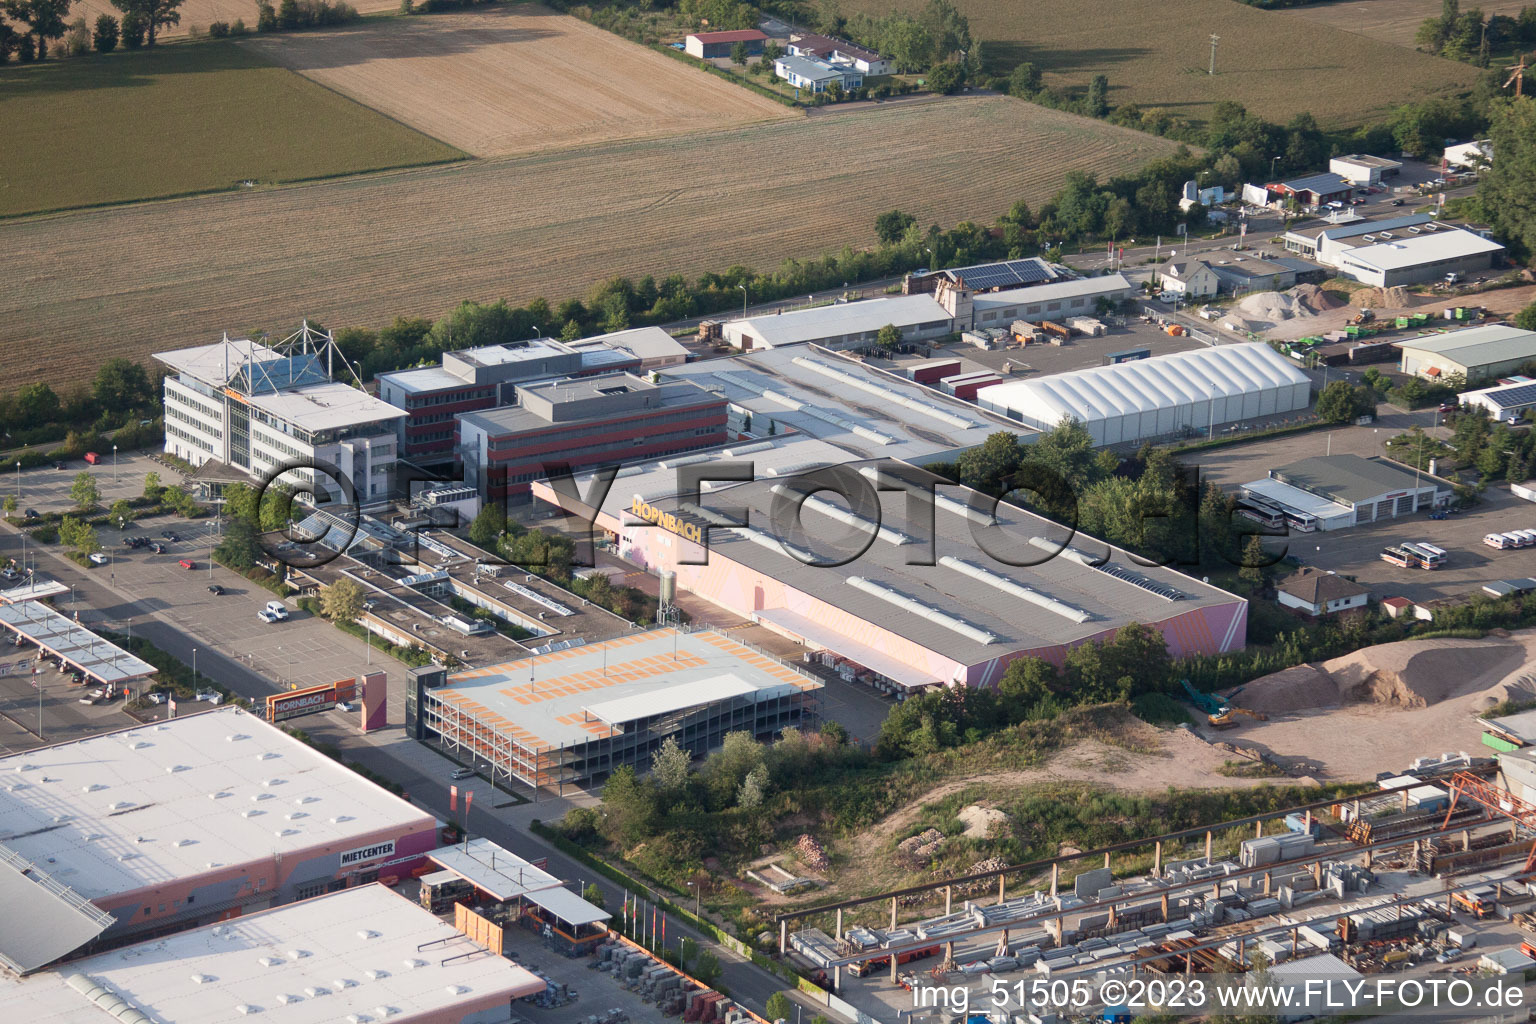 Aerial photograpy of Offenbach an der Queich in the state Rhineland-Palatinate, Germany